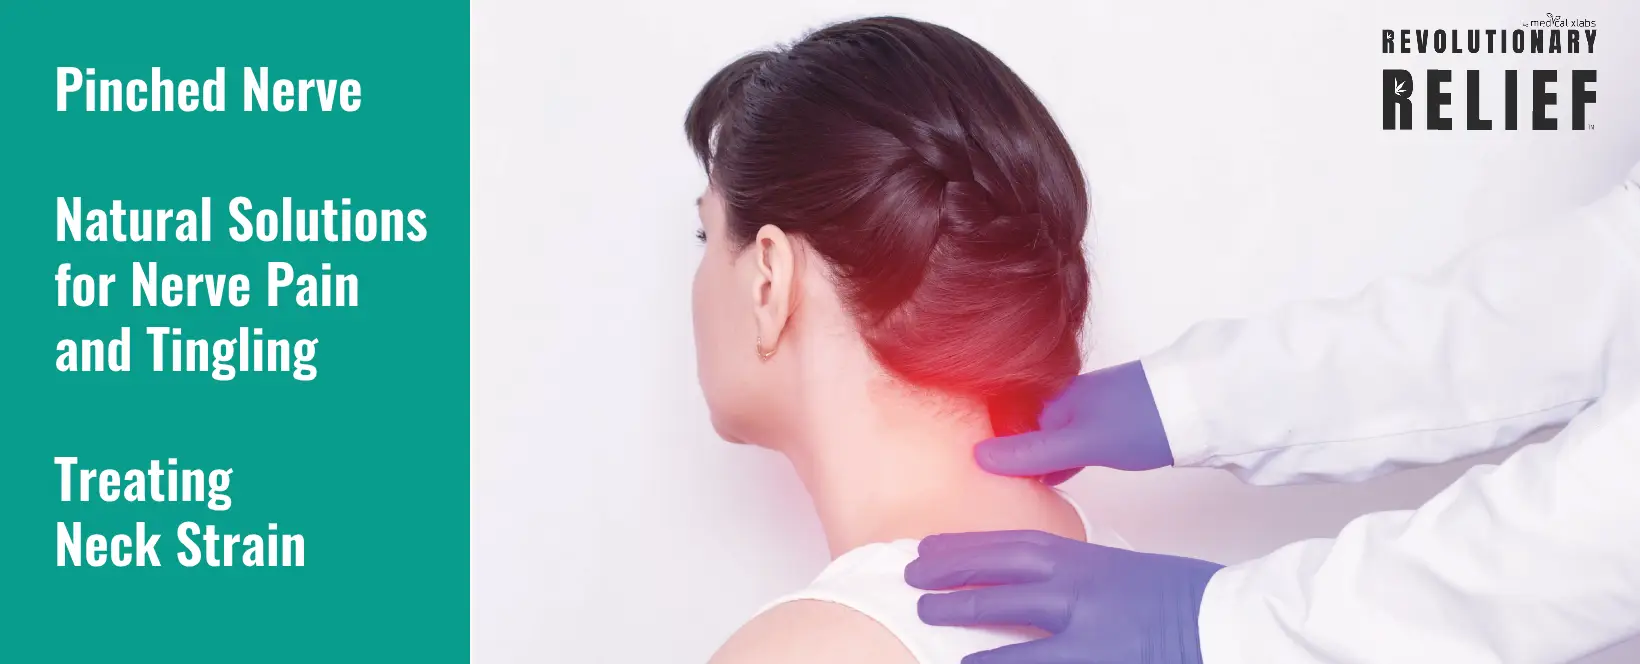 Natural Solutions for Nerve Pain and Tingling, Treating Neck Strain